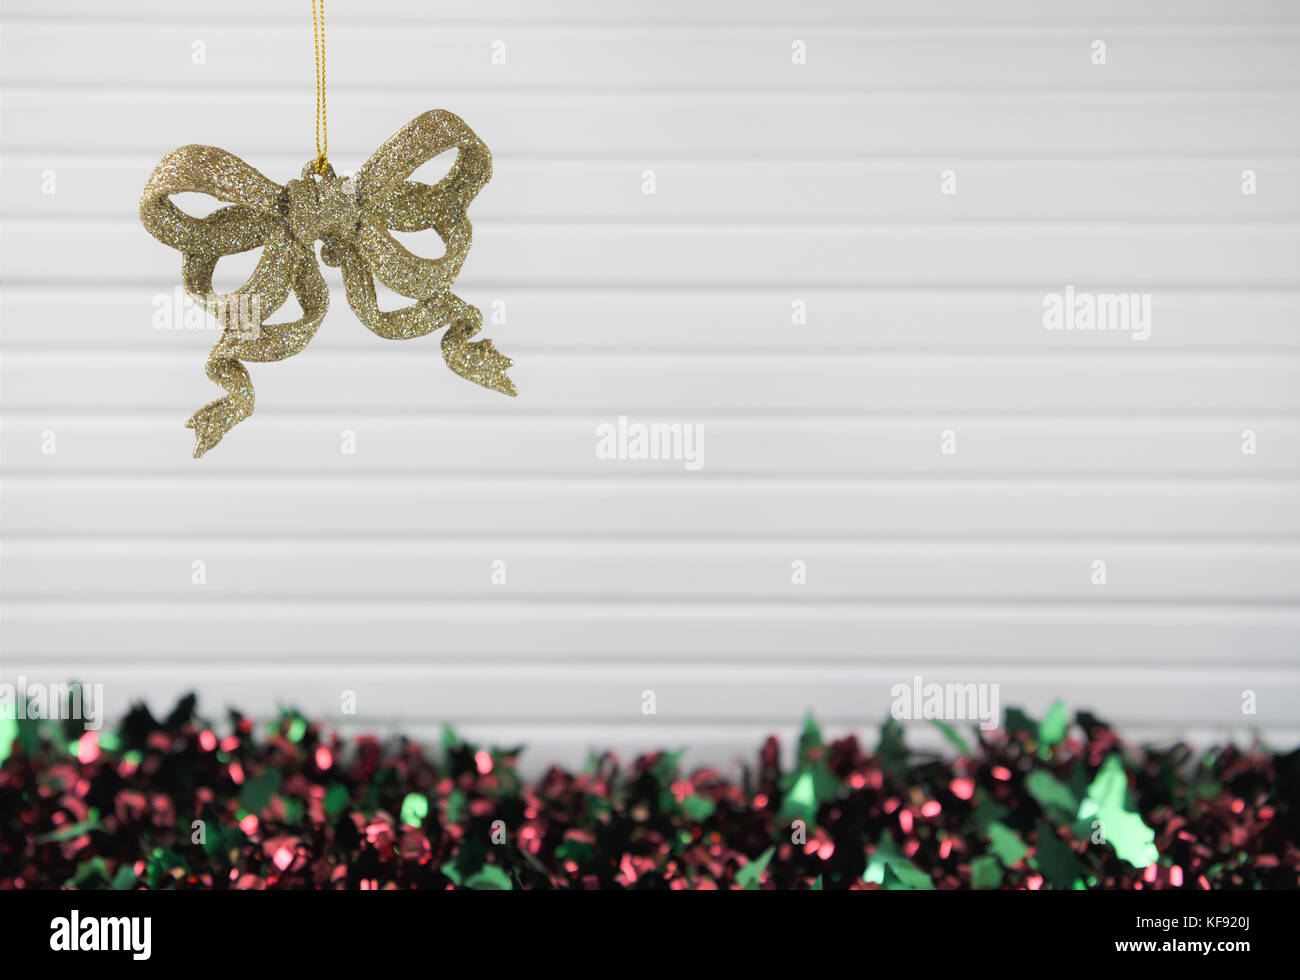 Christmas photography picture of xmas tree decoration hanging up of gold glitter sparkle bows with colored red green tinsel and white wood background Stock Photo